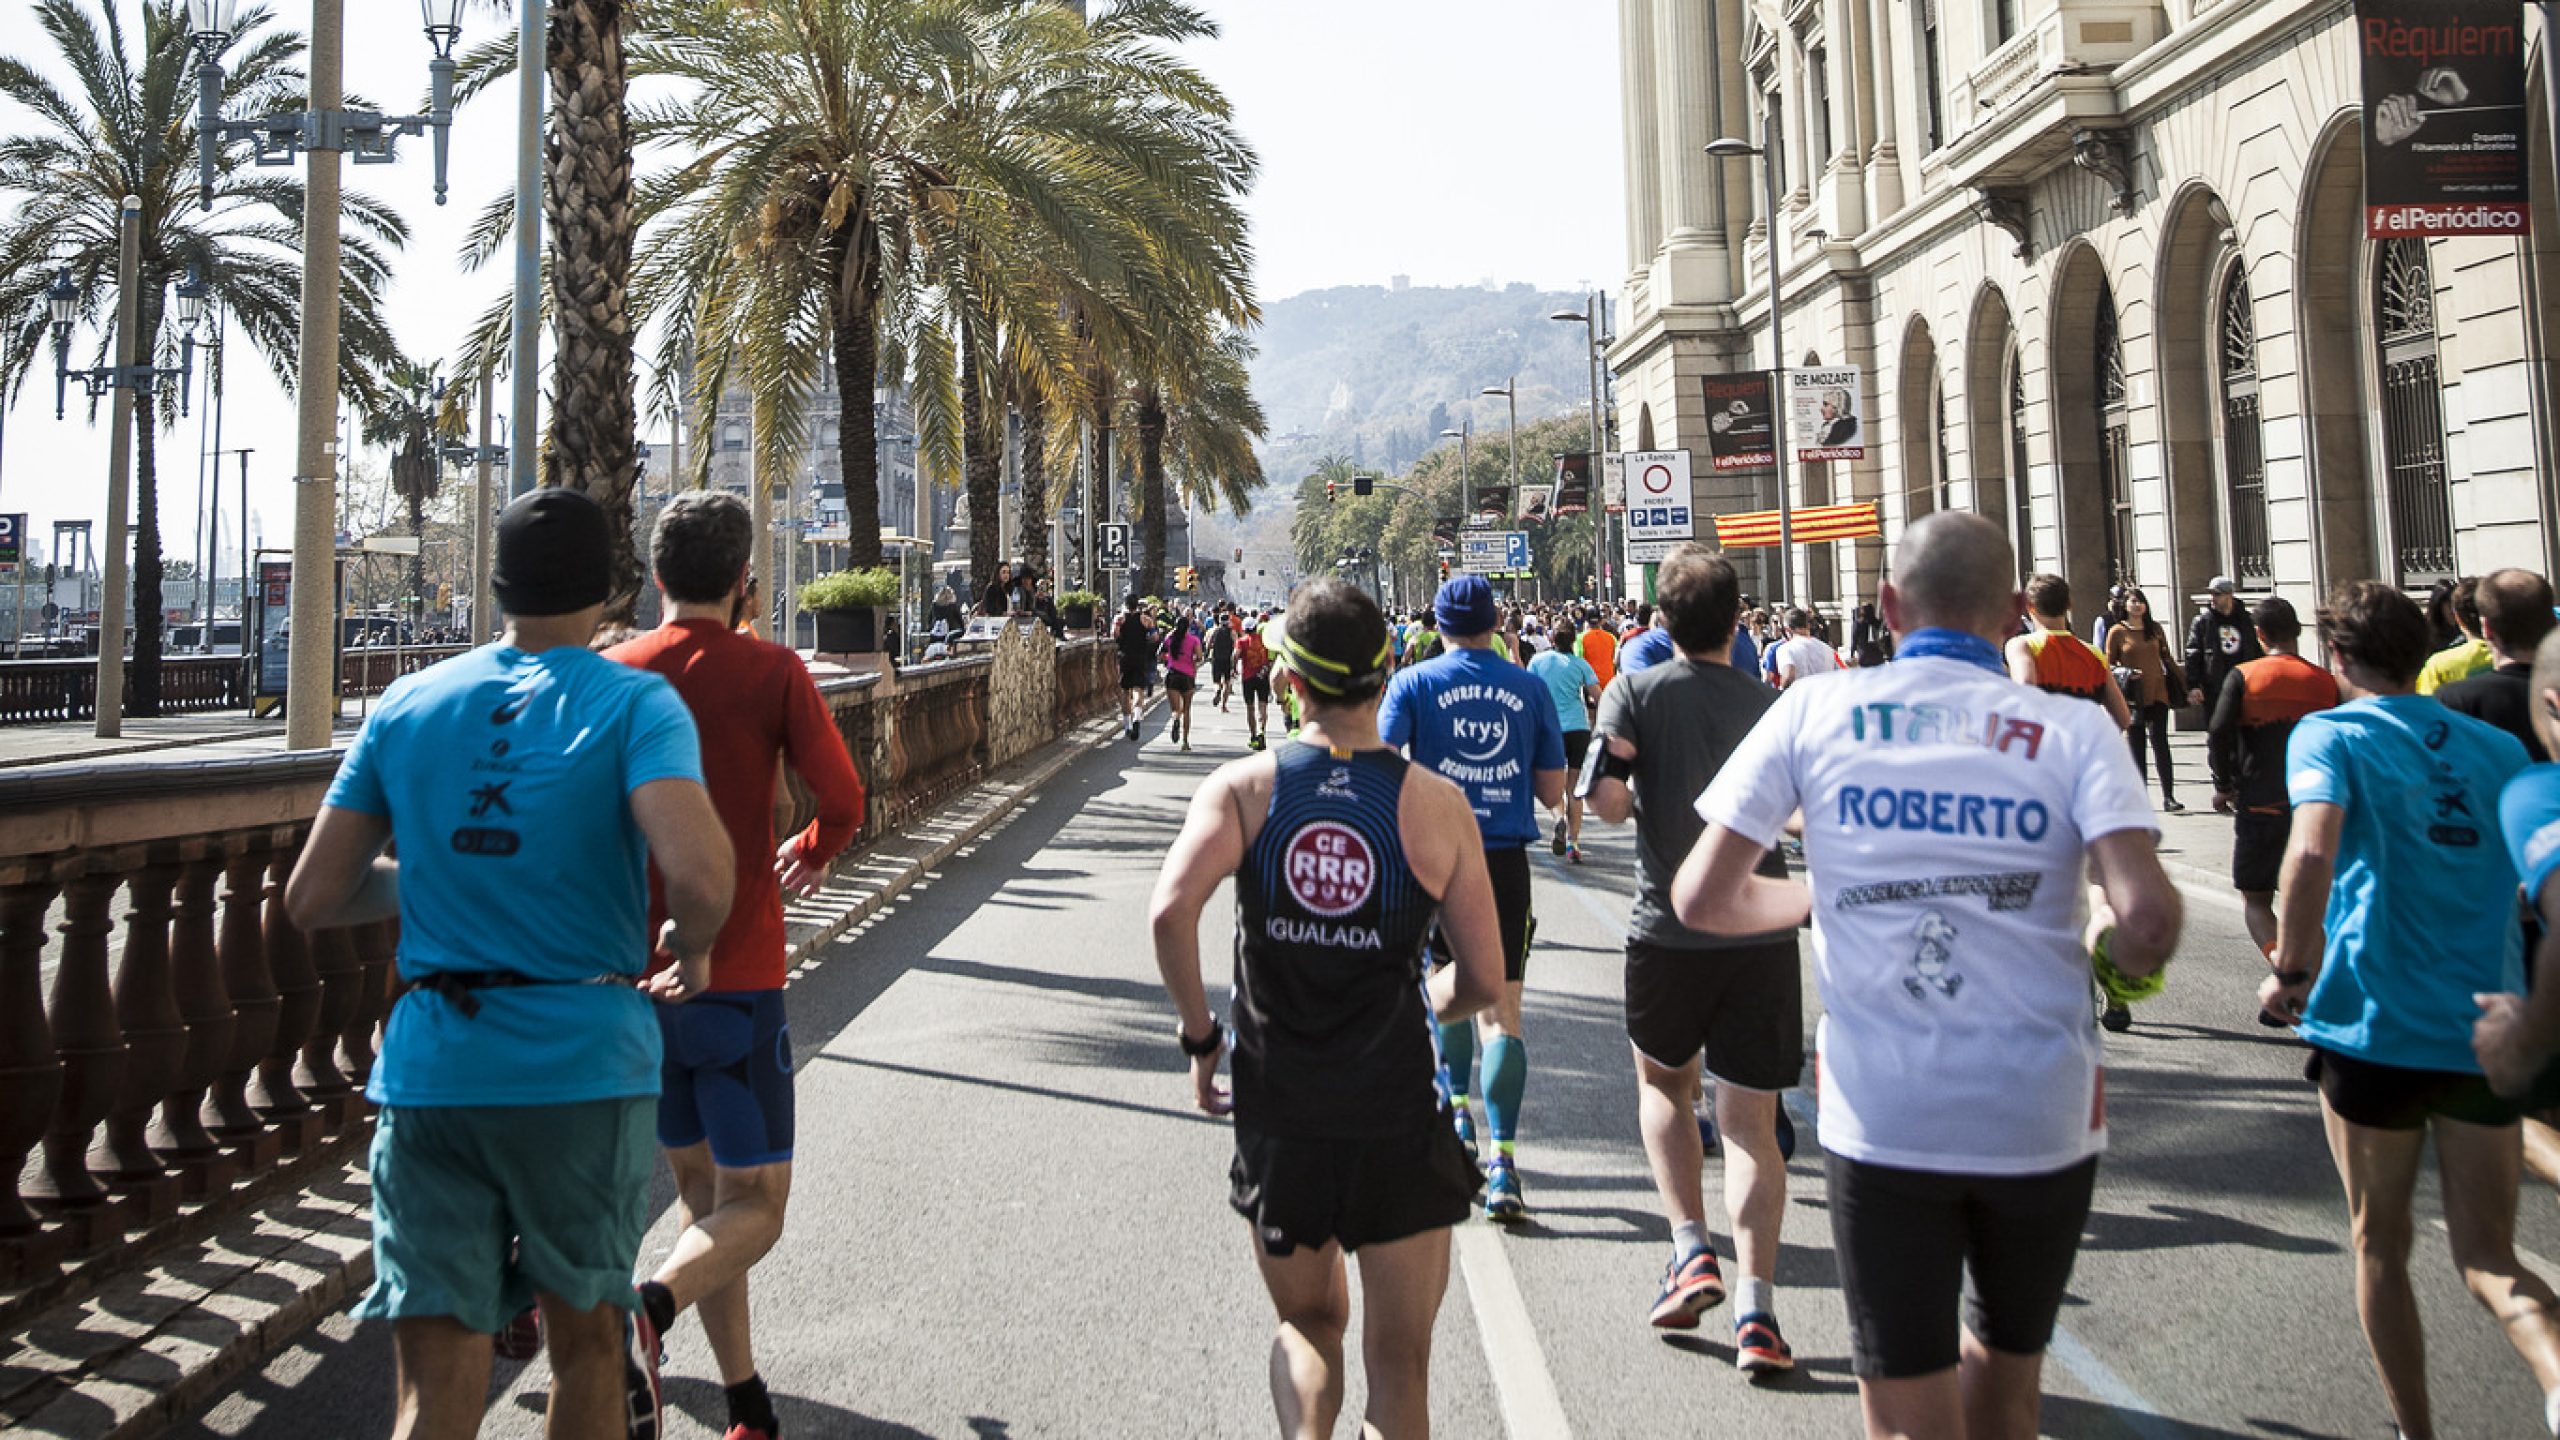 Runners in the Barcelona half marathon with a row of palm trees to the left of the picture